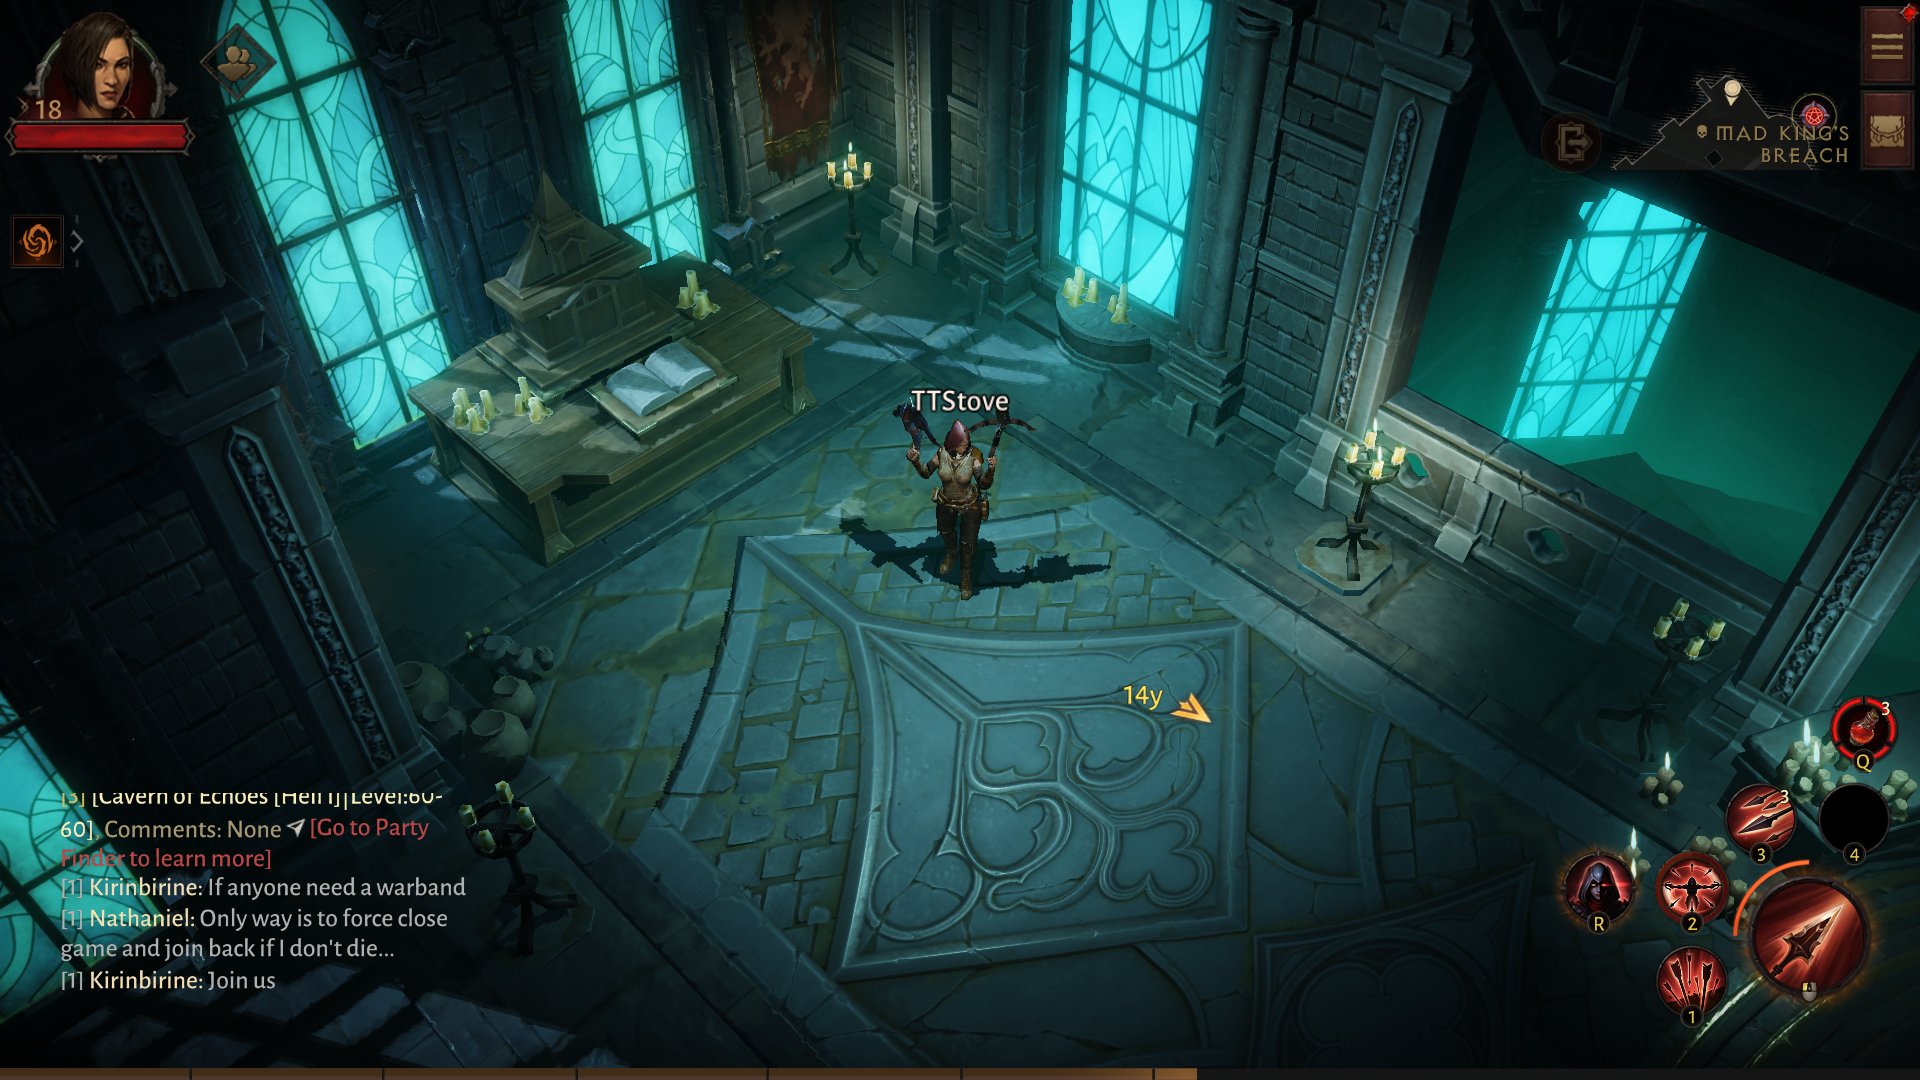 An archer stands within a castle study in Diablo Immortal, showing High graphics.